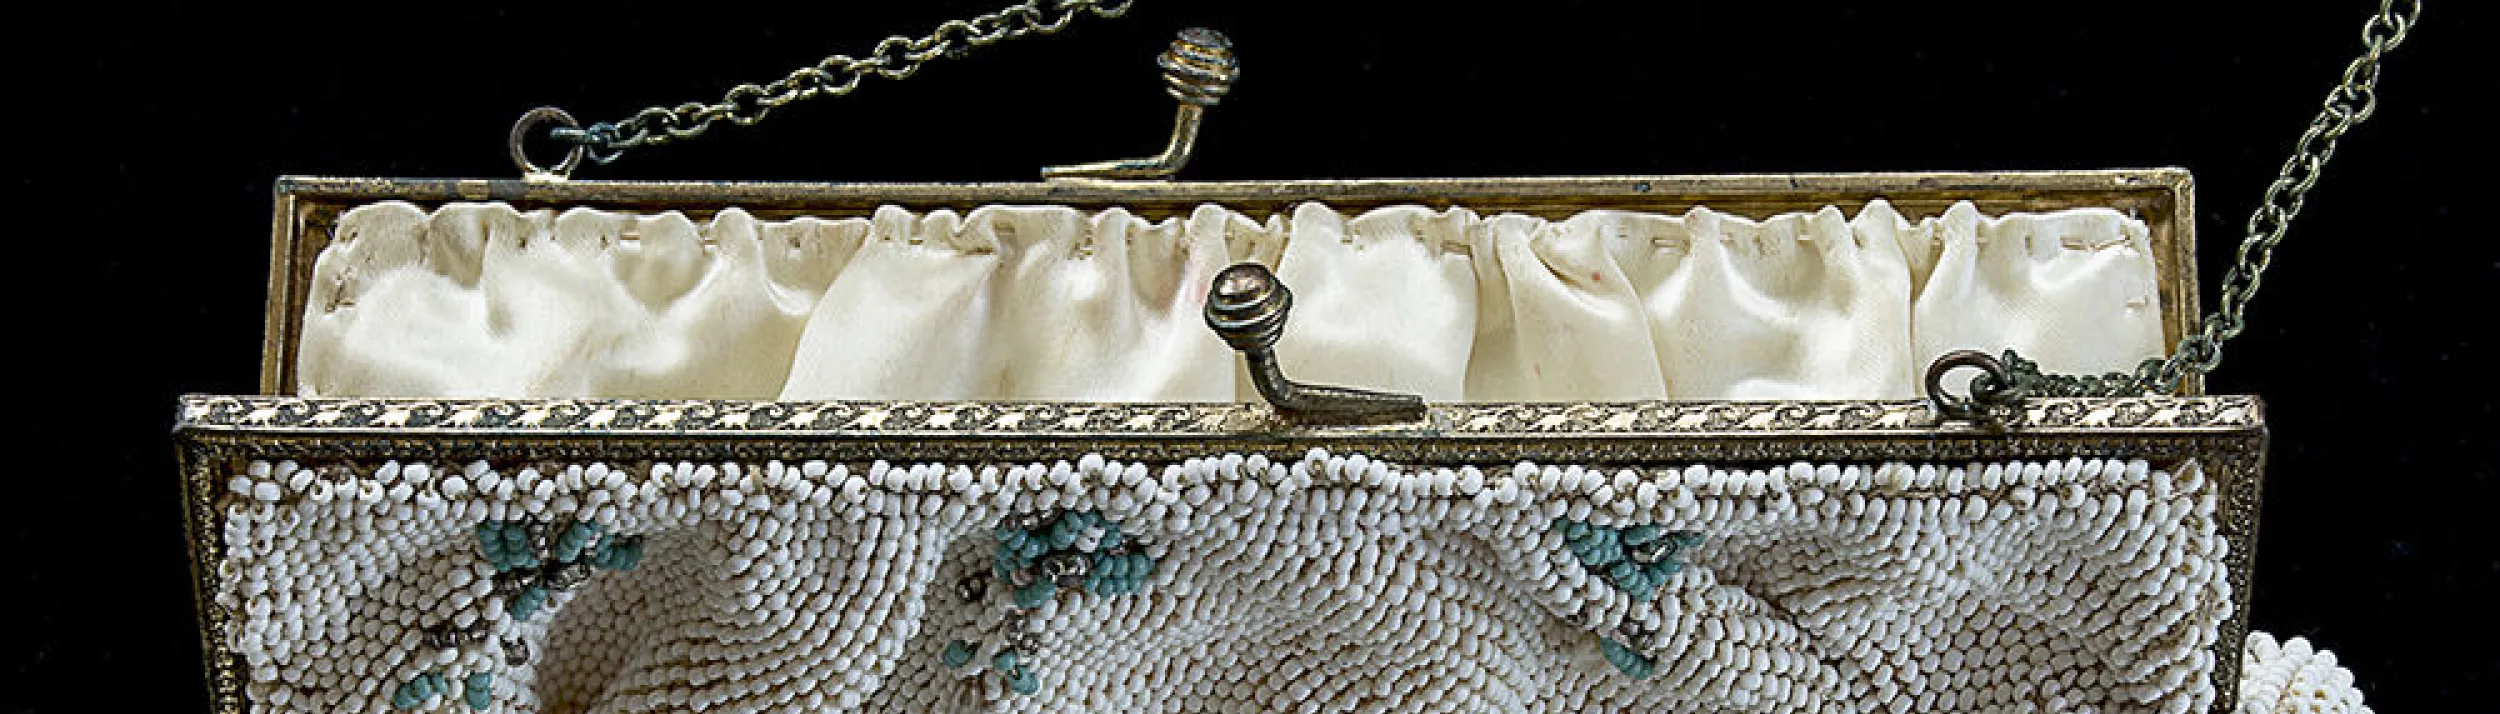 Vintage white beaded purse with turquoise beaded flowers and metal clasp